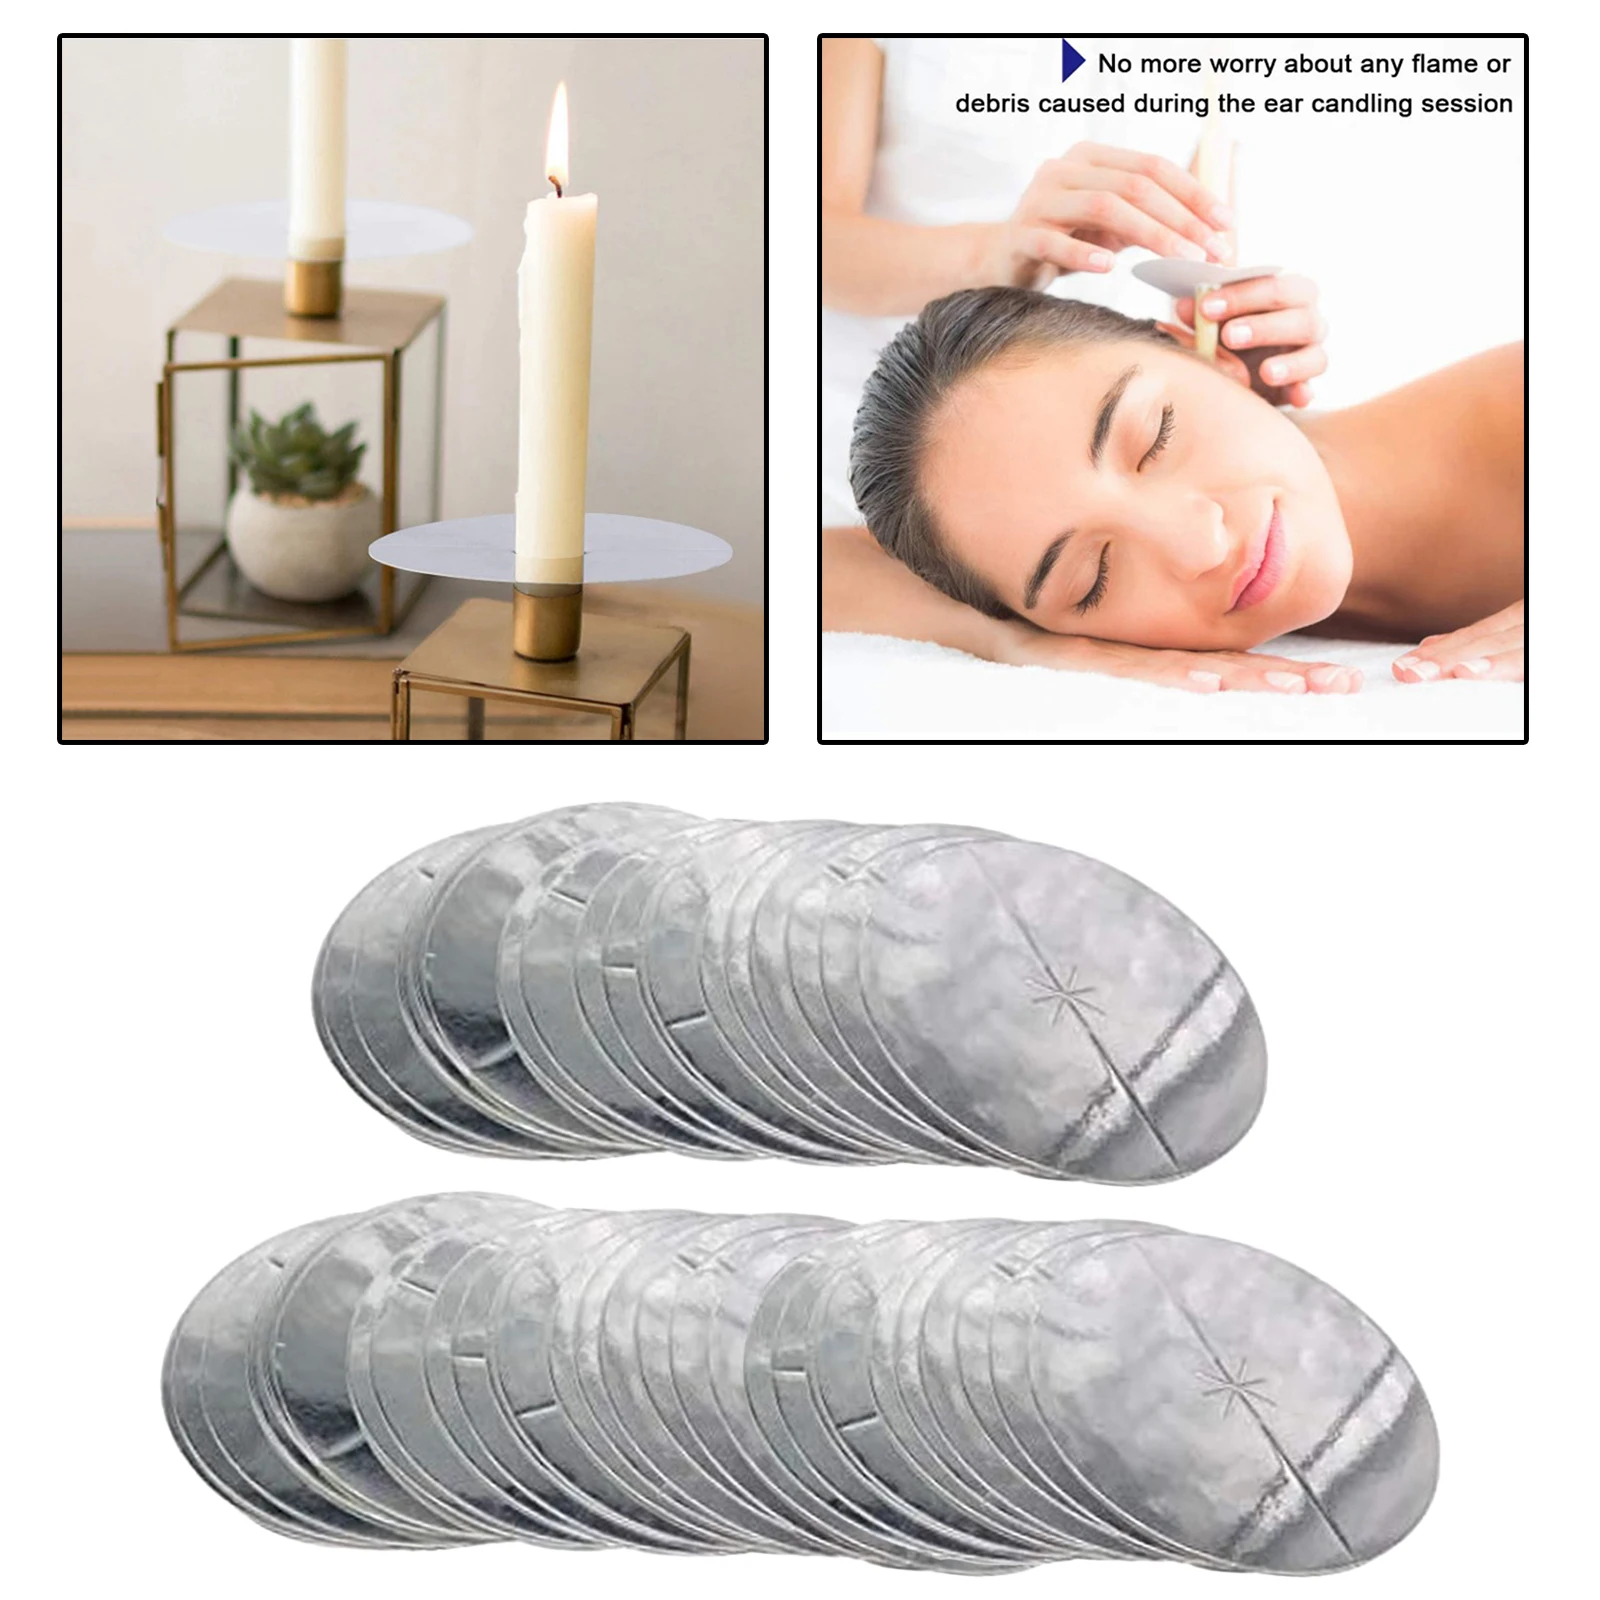 

50pcs Candles Drip Protectors Personal Protective Disk Supplies for Ear Care Drip Guard Candle Holders Cardboard Accessories